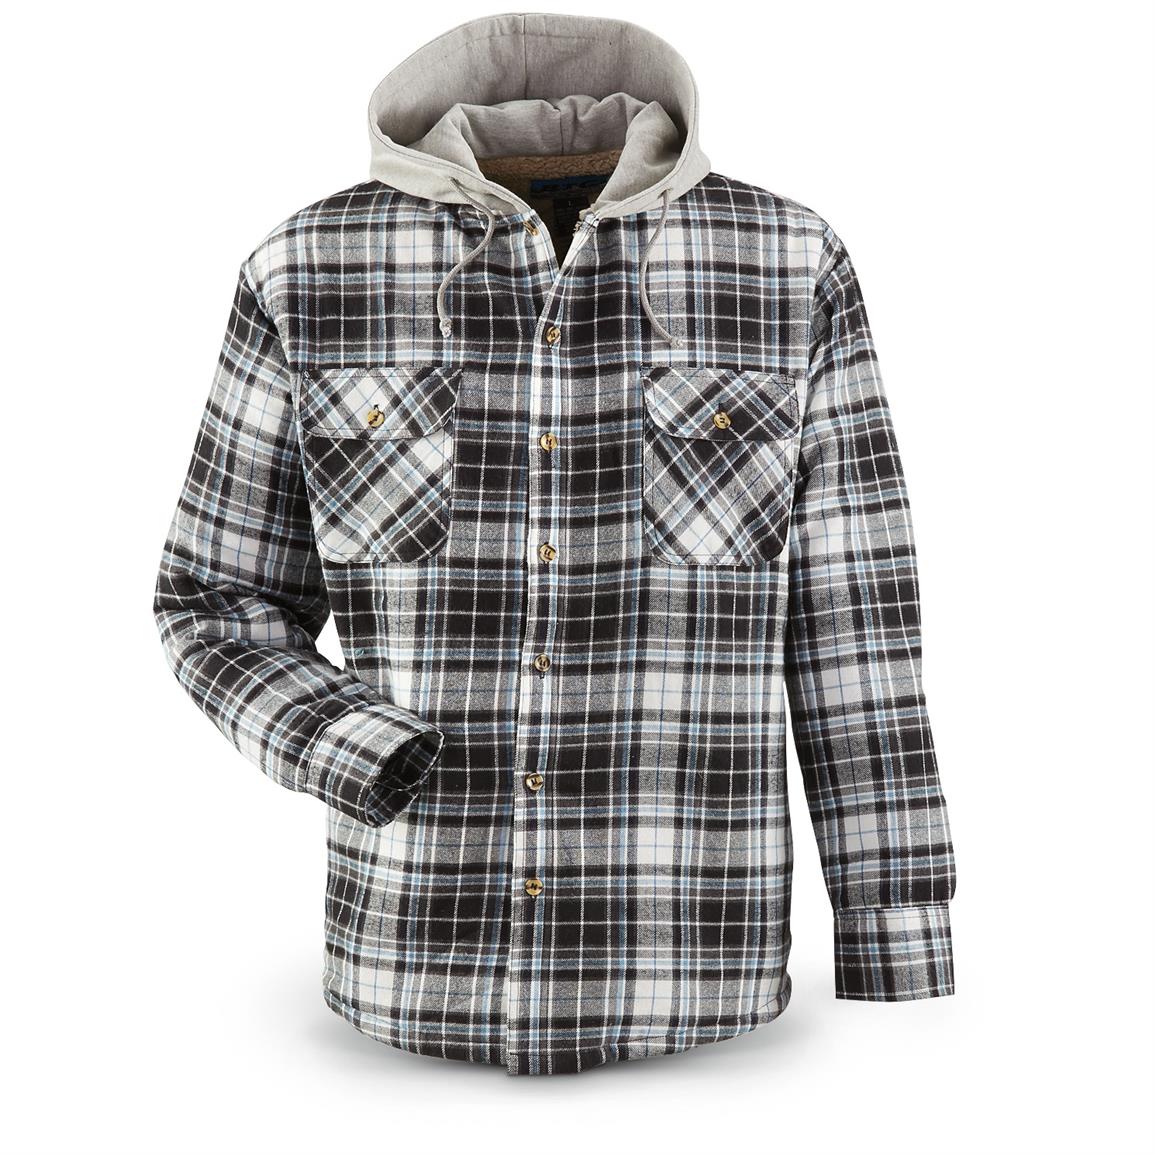 Men's Sherpa-Lined Hooded Shirt - 665228, Shirts at Sportsman's Guide